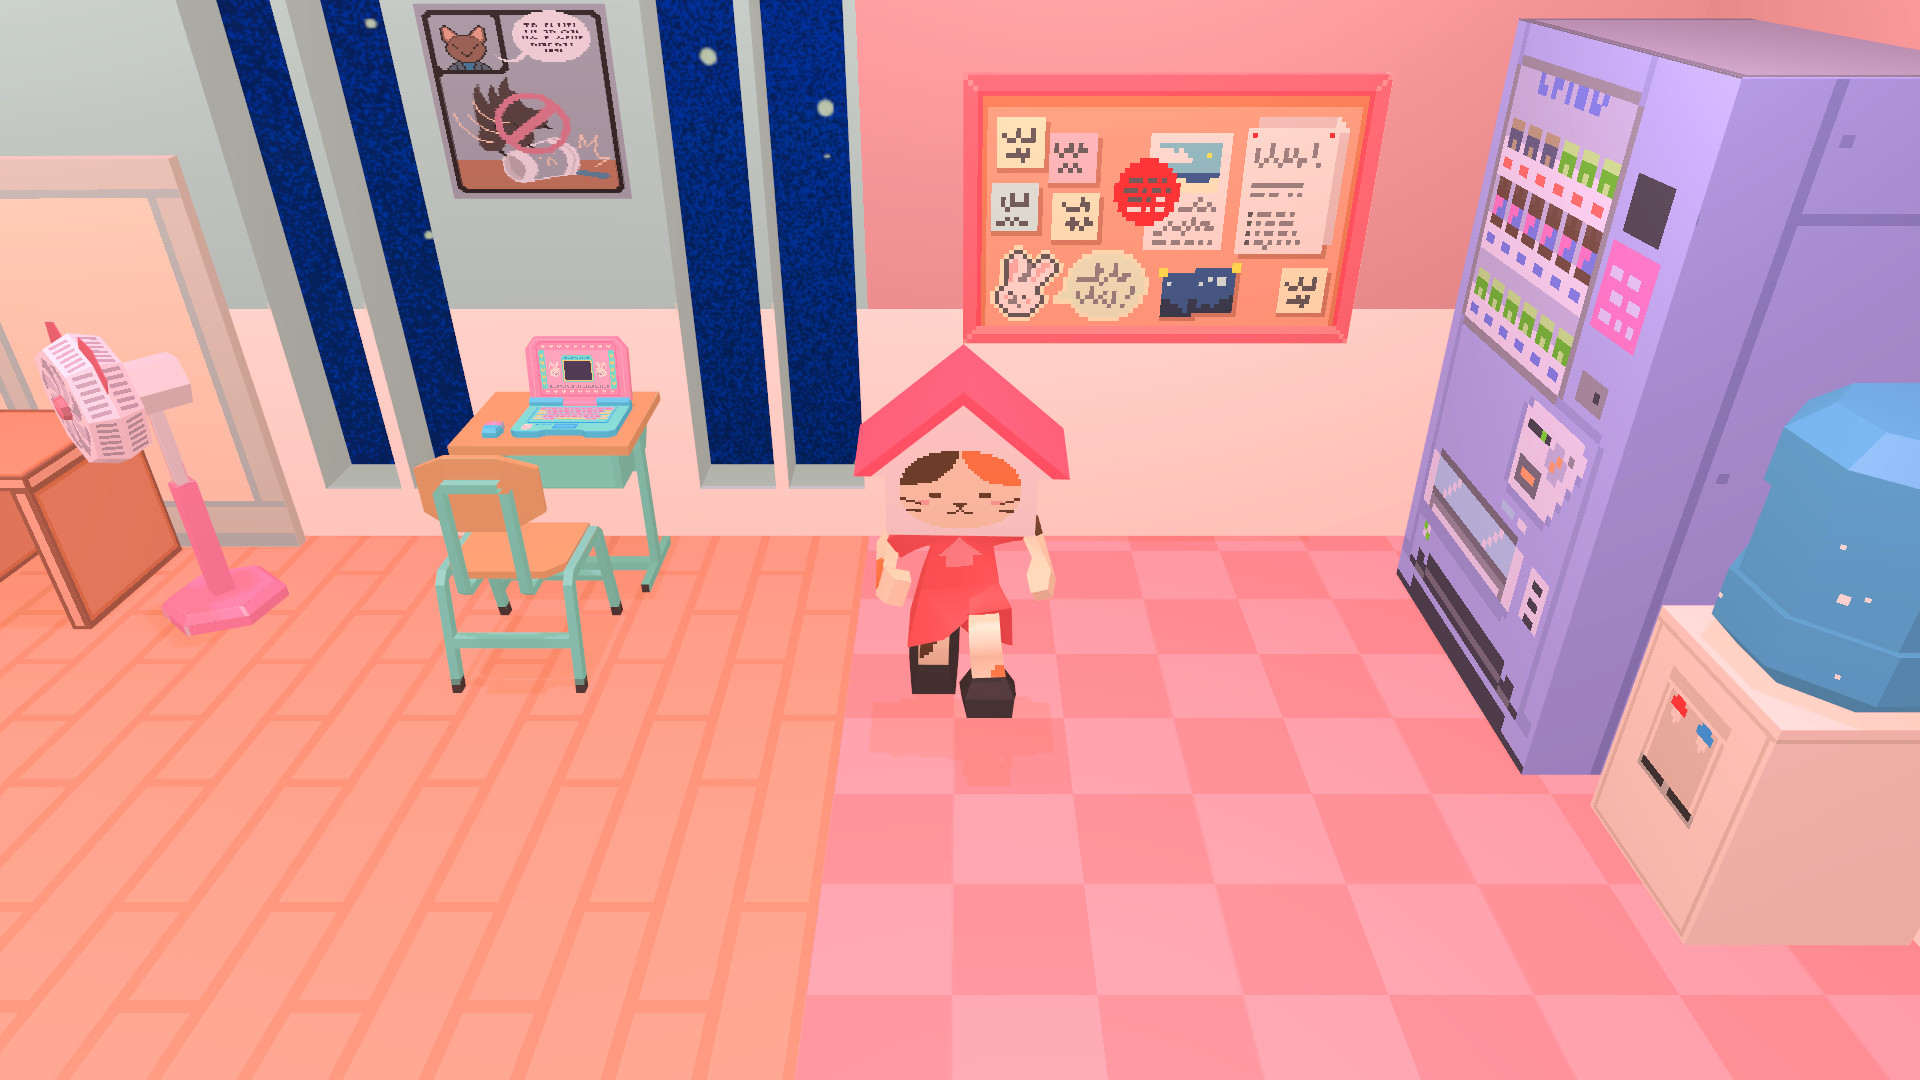 Screenshot of a calico cat with a pink dress and a pink house on its head in a pink tiled room from indie game Bubblegum Galaxy